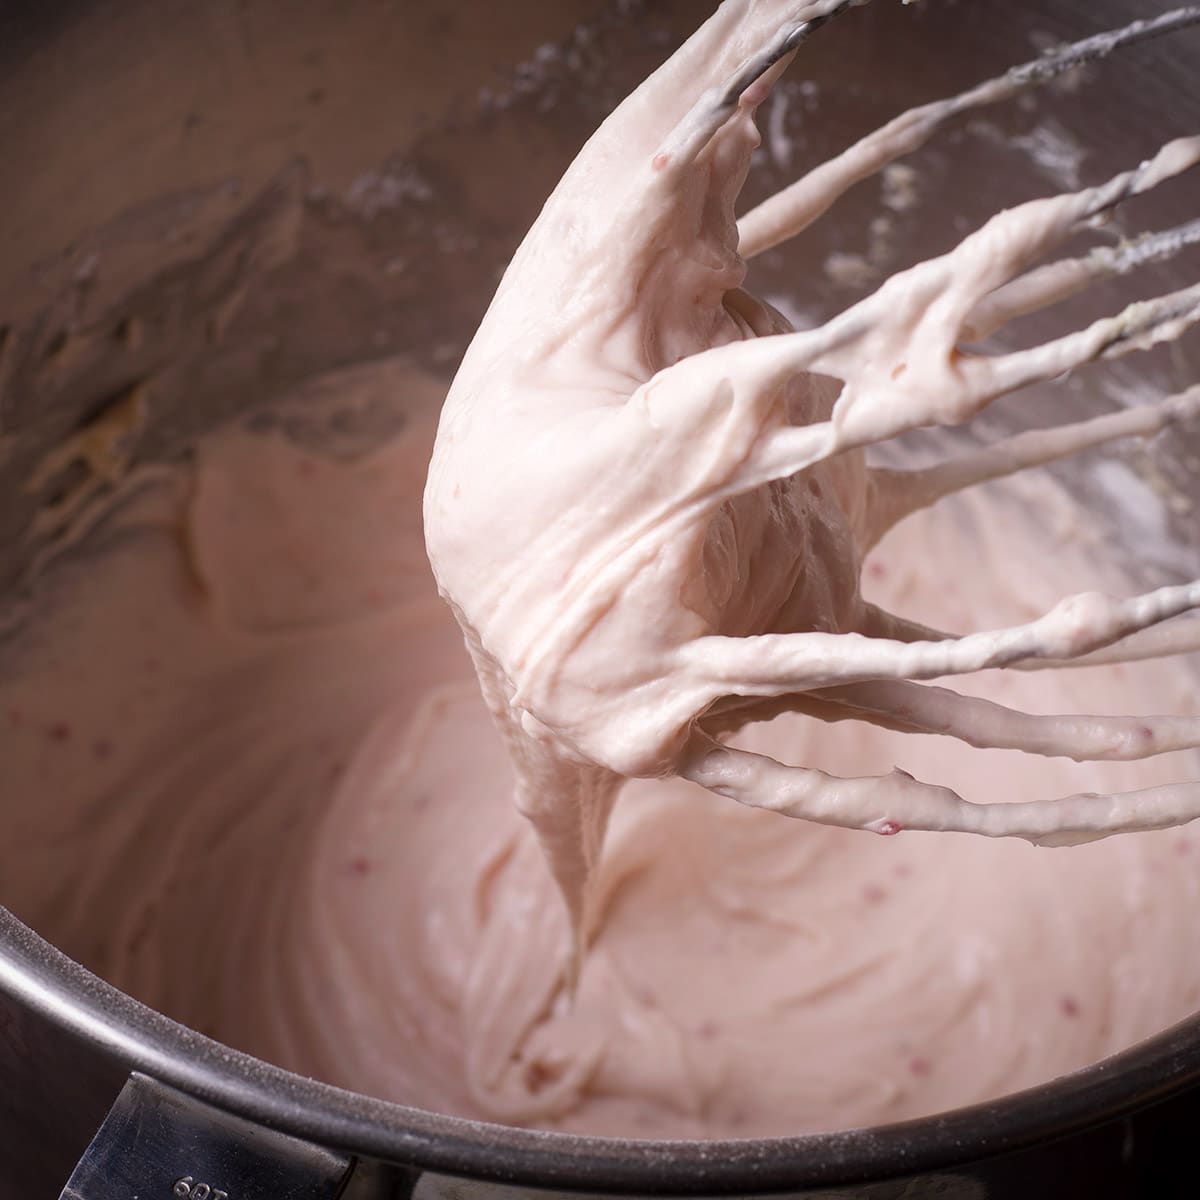 Raspberry cream cheese frosting dripping from the whisk attachment of an electric mixer into a mixing bowl.